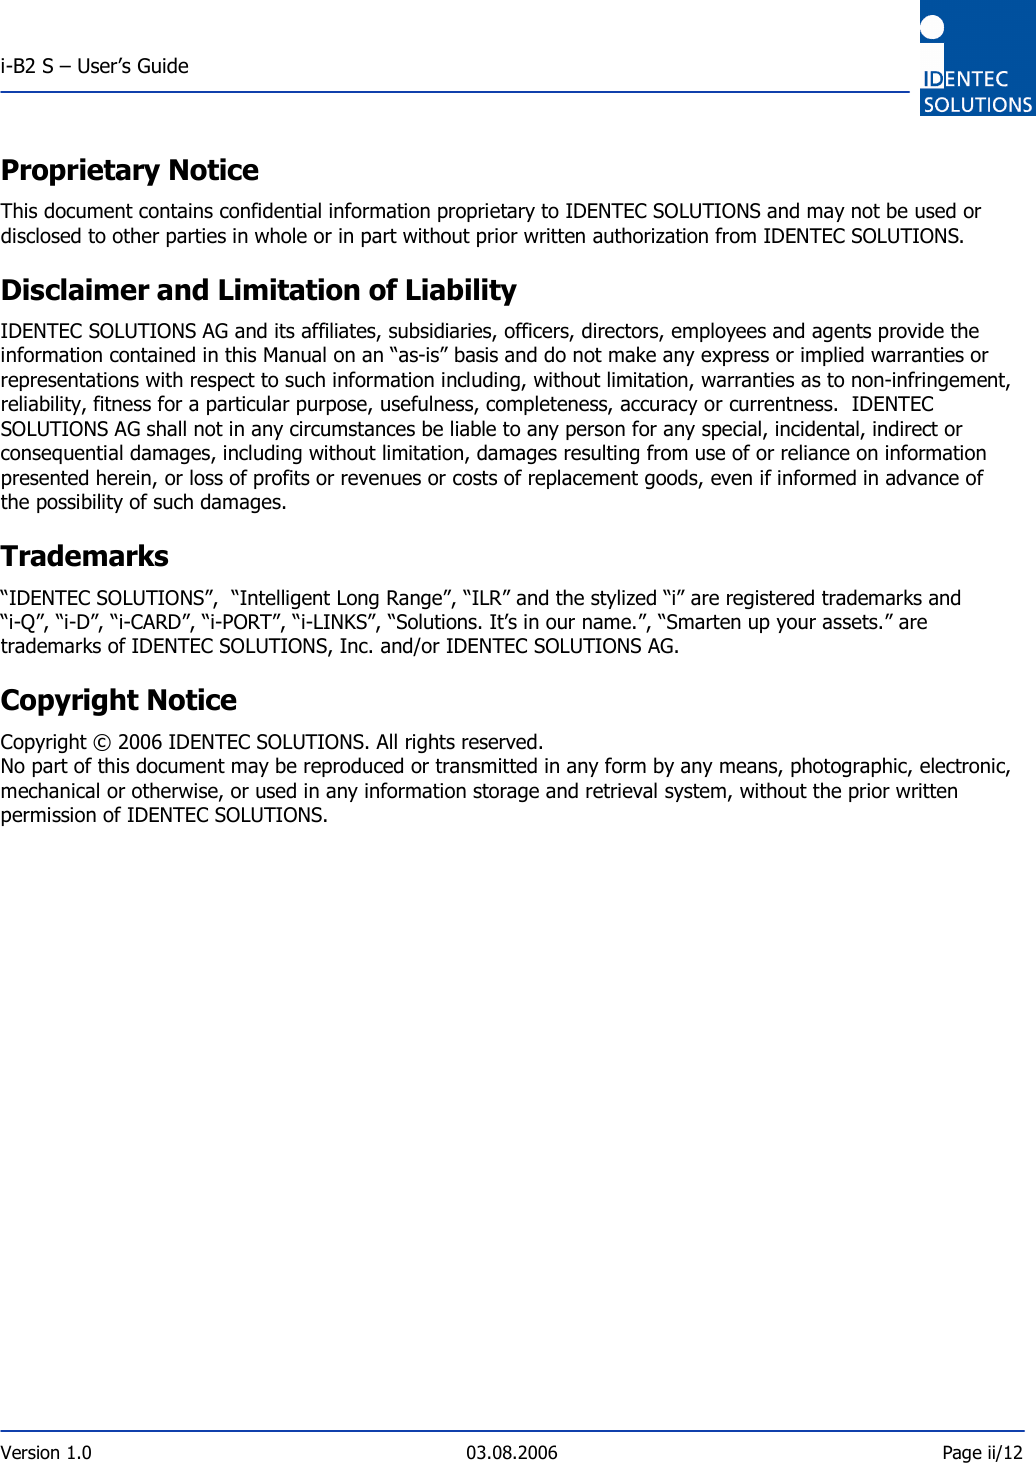  i-B2 S – User’s Guide  Version 1.0  03.08.2006  Page ii/12    Proprietary Notice This document contains confidential information proprietary to IDENTEC SOLUTIONS and may not be used or disclosed to other parties in whole or in part without prior written authorization from IDENTEC SOLUTIONS. Disclaimer and Limitation of Liability IDENTEC SOLUTIONS AG and its affiliates, subsidiaries, officers, directors, employees and agents provide the information contained in this Manual on an “as-is” basis and do not make any express or implied warranties or representations with respect to such information including, without limitation, warranties as to non-infringement, reliability, fitness for a particular purpose, usefulness, completeness, accuracy or currentness.  IDENTEC SOLUTIONS AG shall not in any circumstances be liable to any person for any special, incidental, indirect or consequential damages, including without limitation, damages resulting from use of or reliance on information presented herein, or loss of profits or revenues or costs of replacement goods, even if informed in advance of the possibility of such damages. Trademarks “IDENTEC SOLUTIONS”,  “Intelligent Long Range”, “ILR” and the stylized “i” are registered trademarks and “i-Q”, “i-D”, “i-CARD”, “i-PORT”, “i-LINKS”, “Solutions. It’s in our name.”, “Smarten up your assets.” are trademarks of IDENTEC SOLUTIONS, Inc. and/or IDENTEC SOLUTIONS AG. Copyright Notice  Copyright © 2006 IDENTEC SOLUTIONS. All rights reserved. No part of this document may be reproduced or transmitted in any form by any means, photographic, electronic, mechanical or otherwise, or used in any information storage and retrieval system, without the prior written permission of IDENTEC SOLUTIONS.     